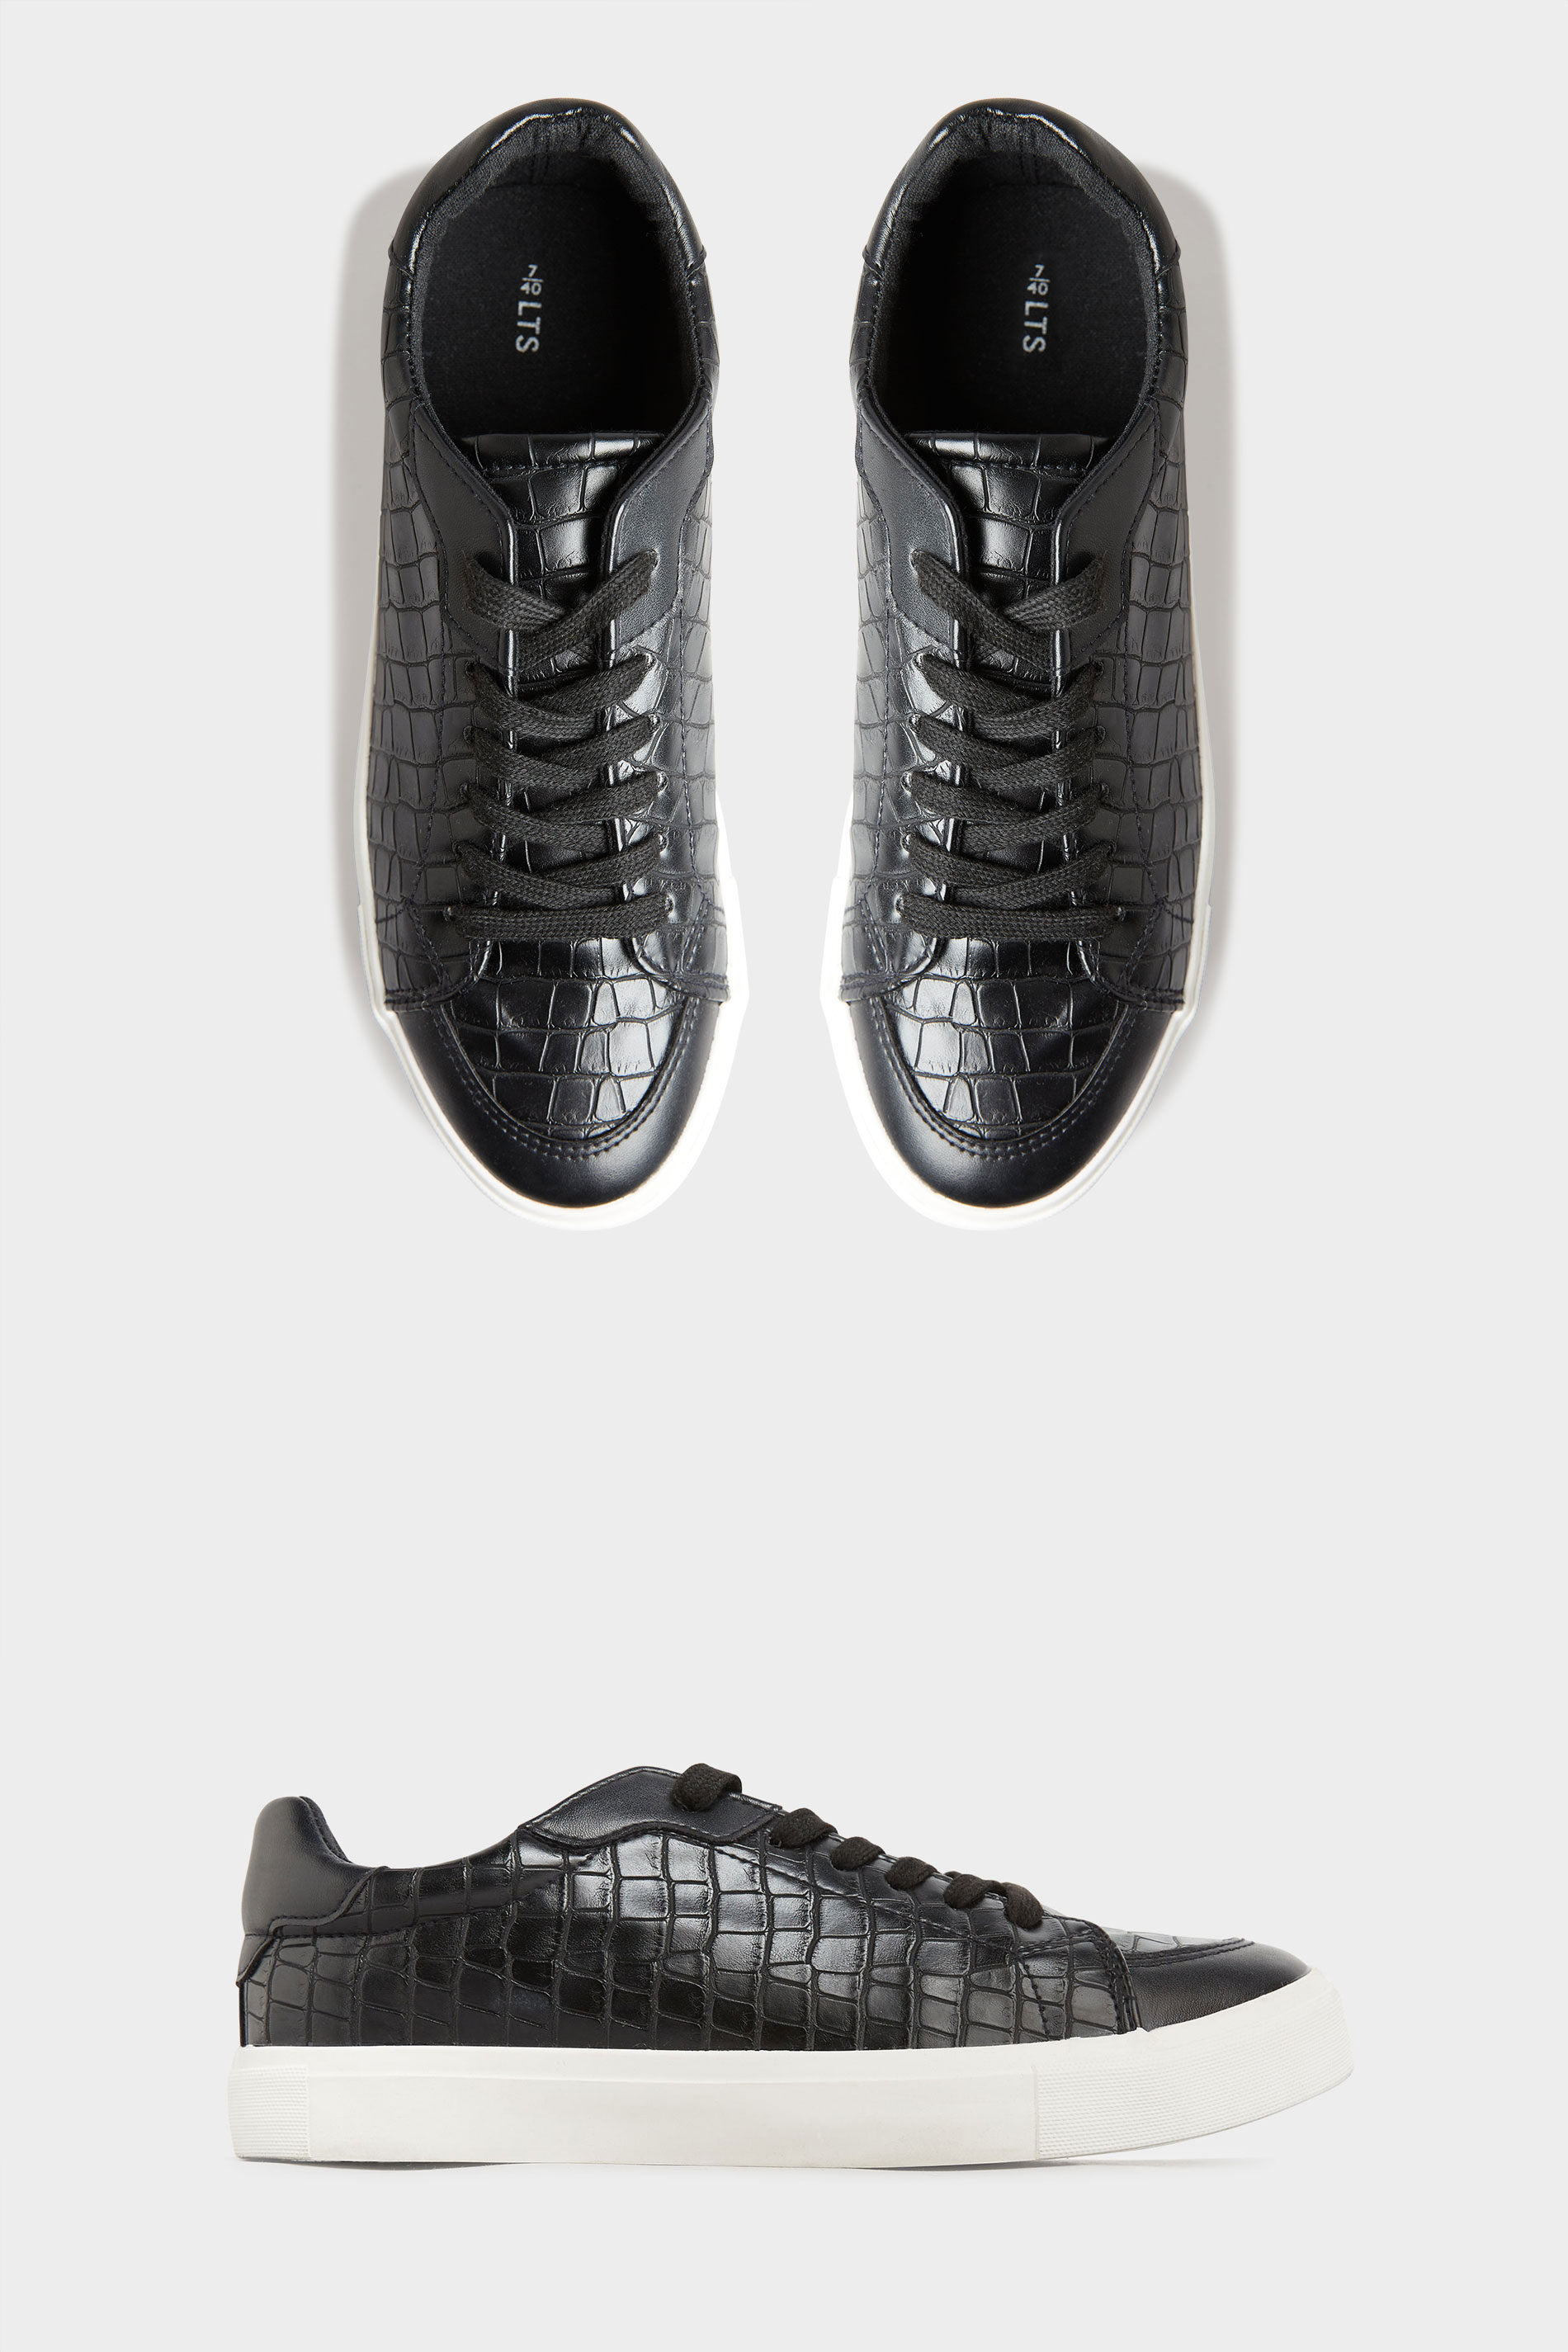 LTS Black Croc Lace Up Trainers In Standard Fit | Long Tall Sally  2